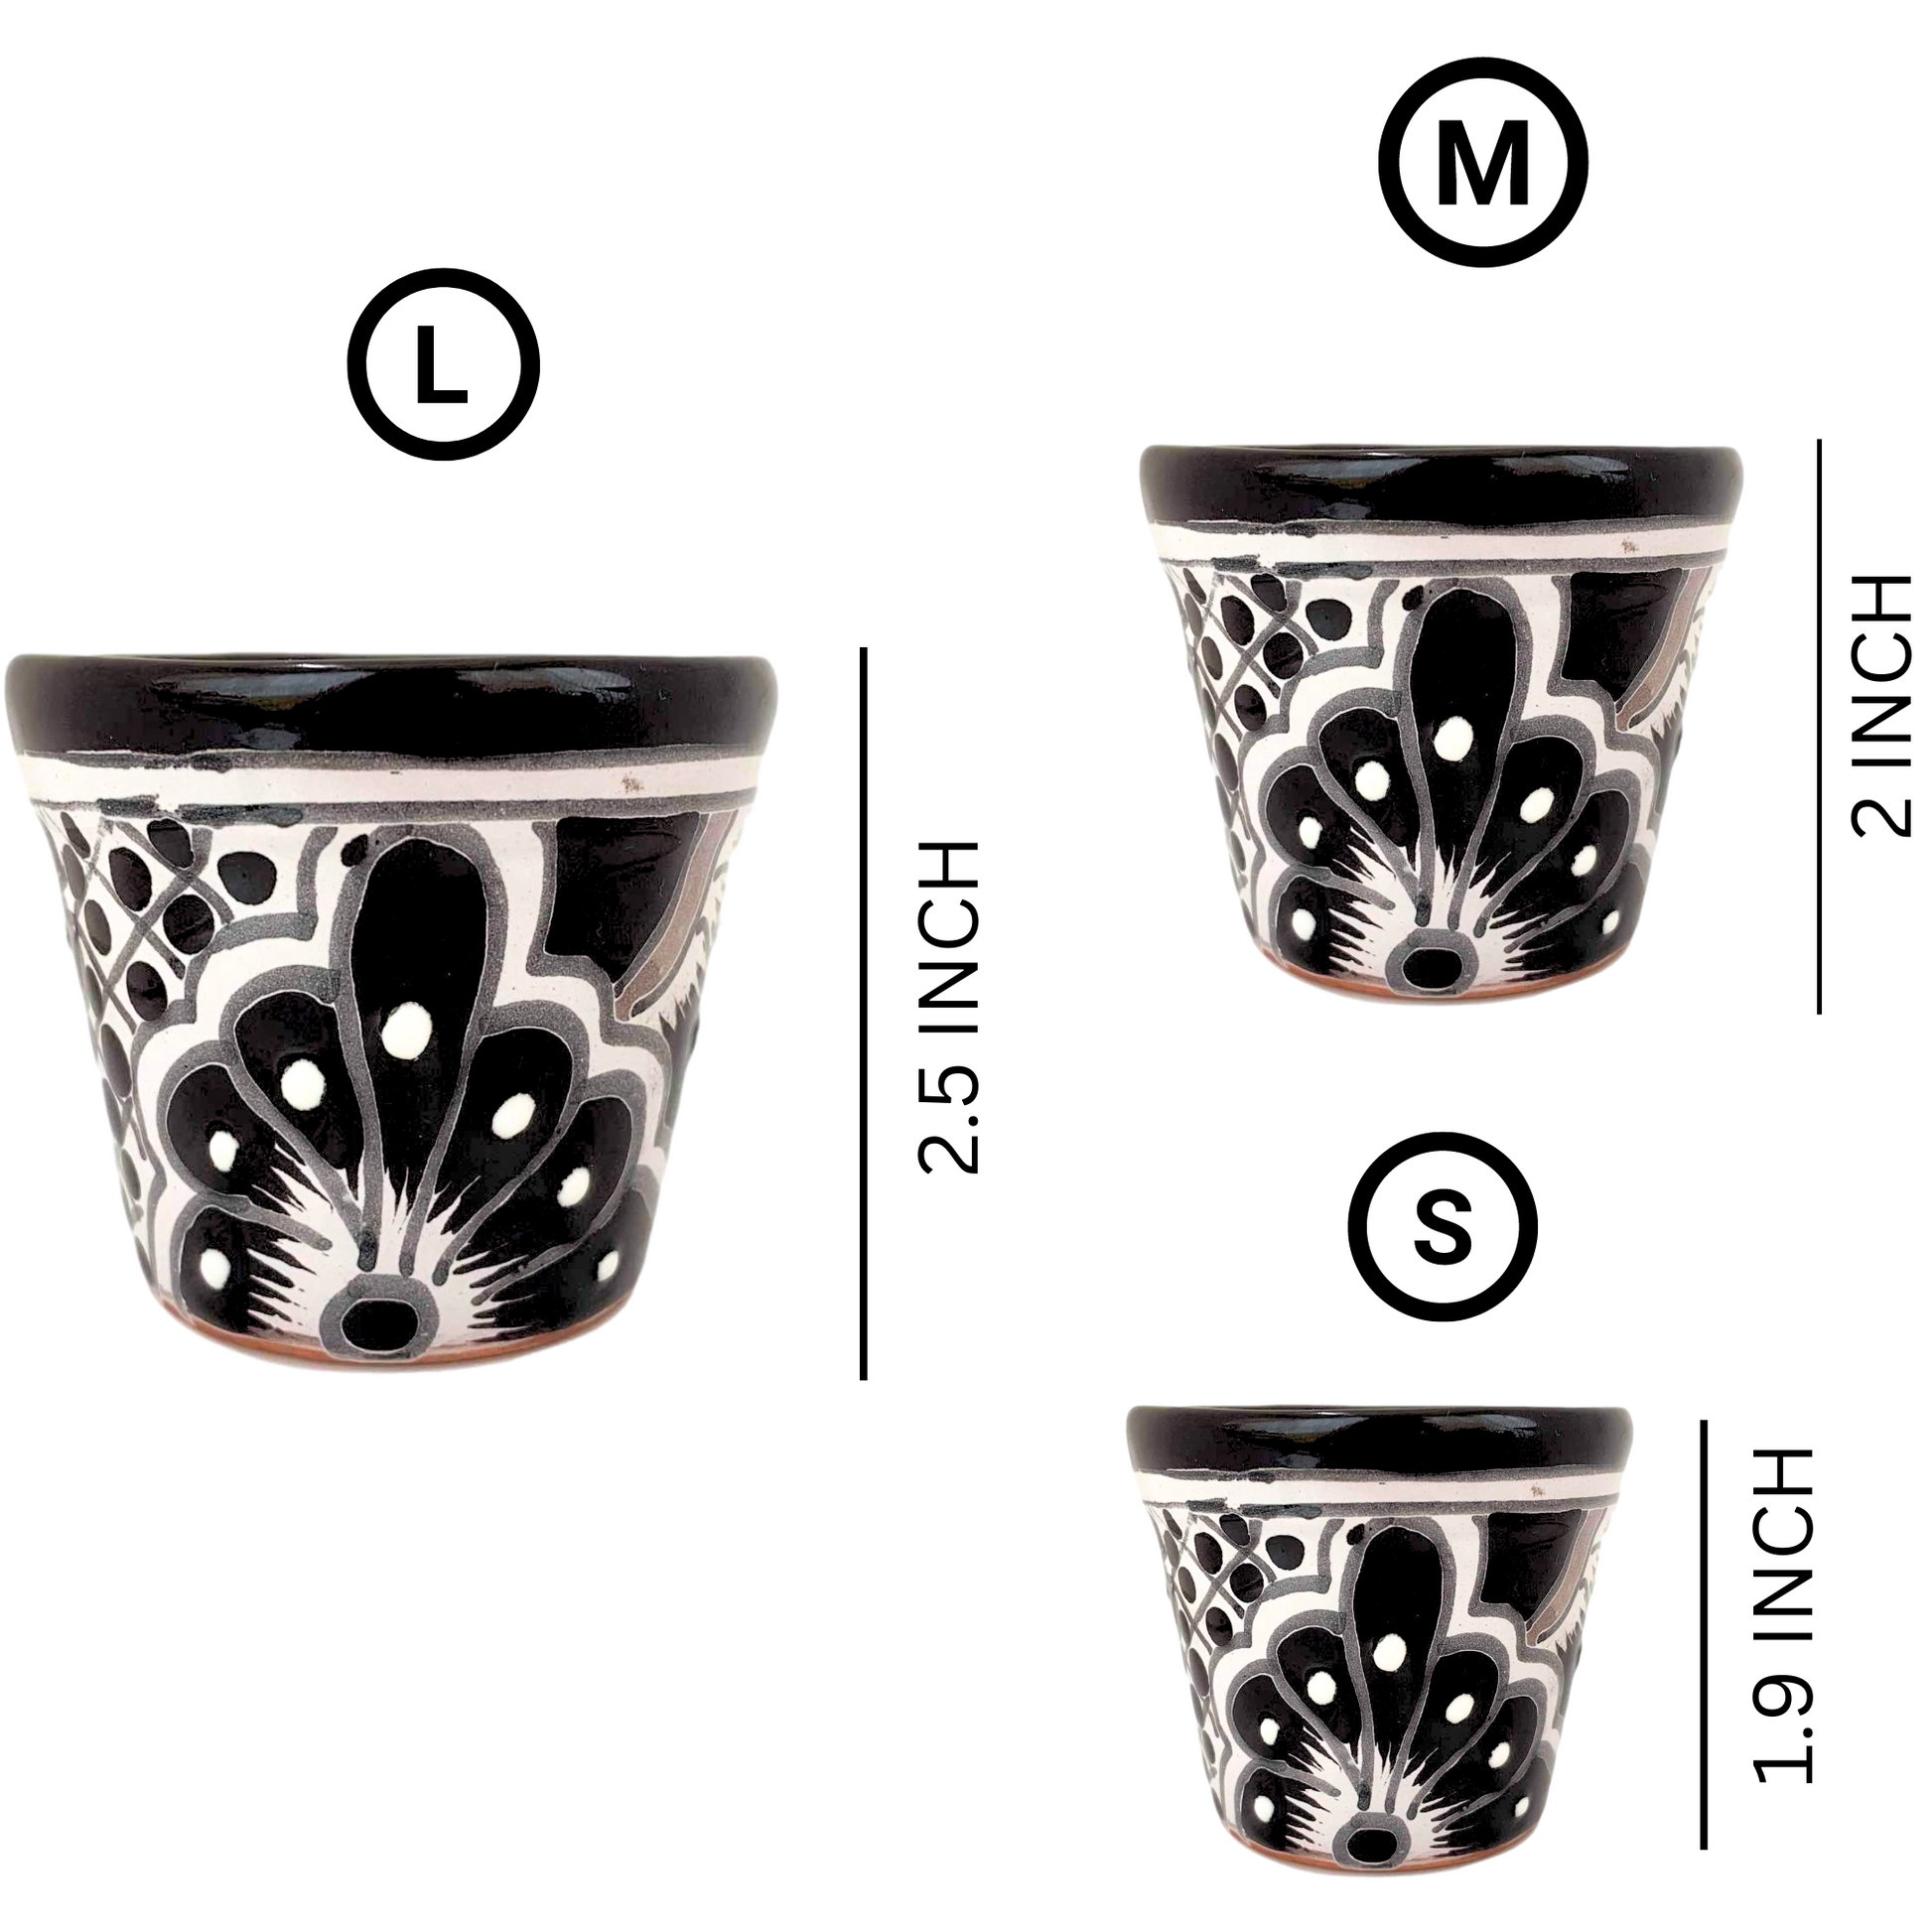 sizes of Black and WhiteTalavera Ceramic Succulent Plant Pots - Hand-Painted Mexican Artistry by Casa Fiesta Designs.